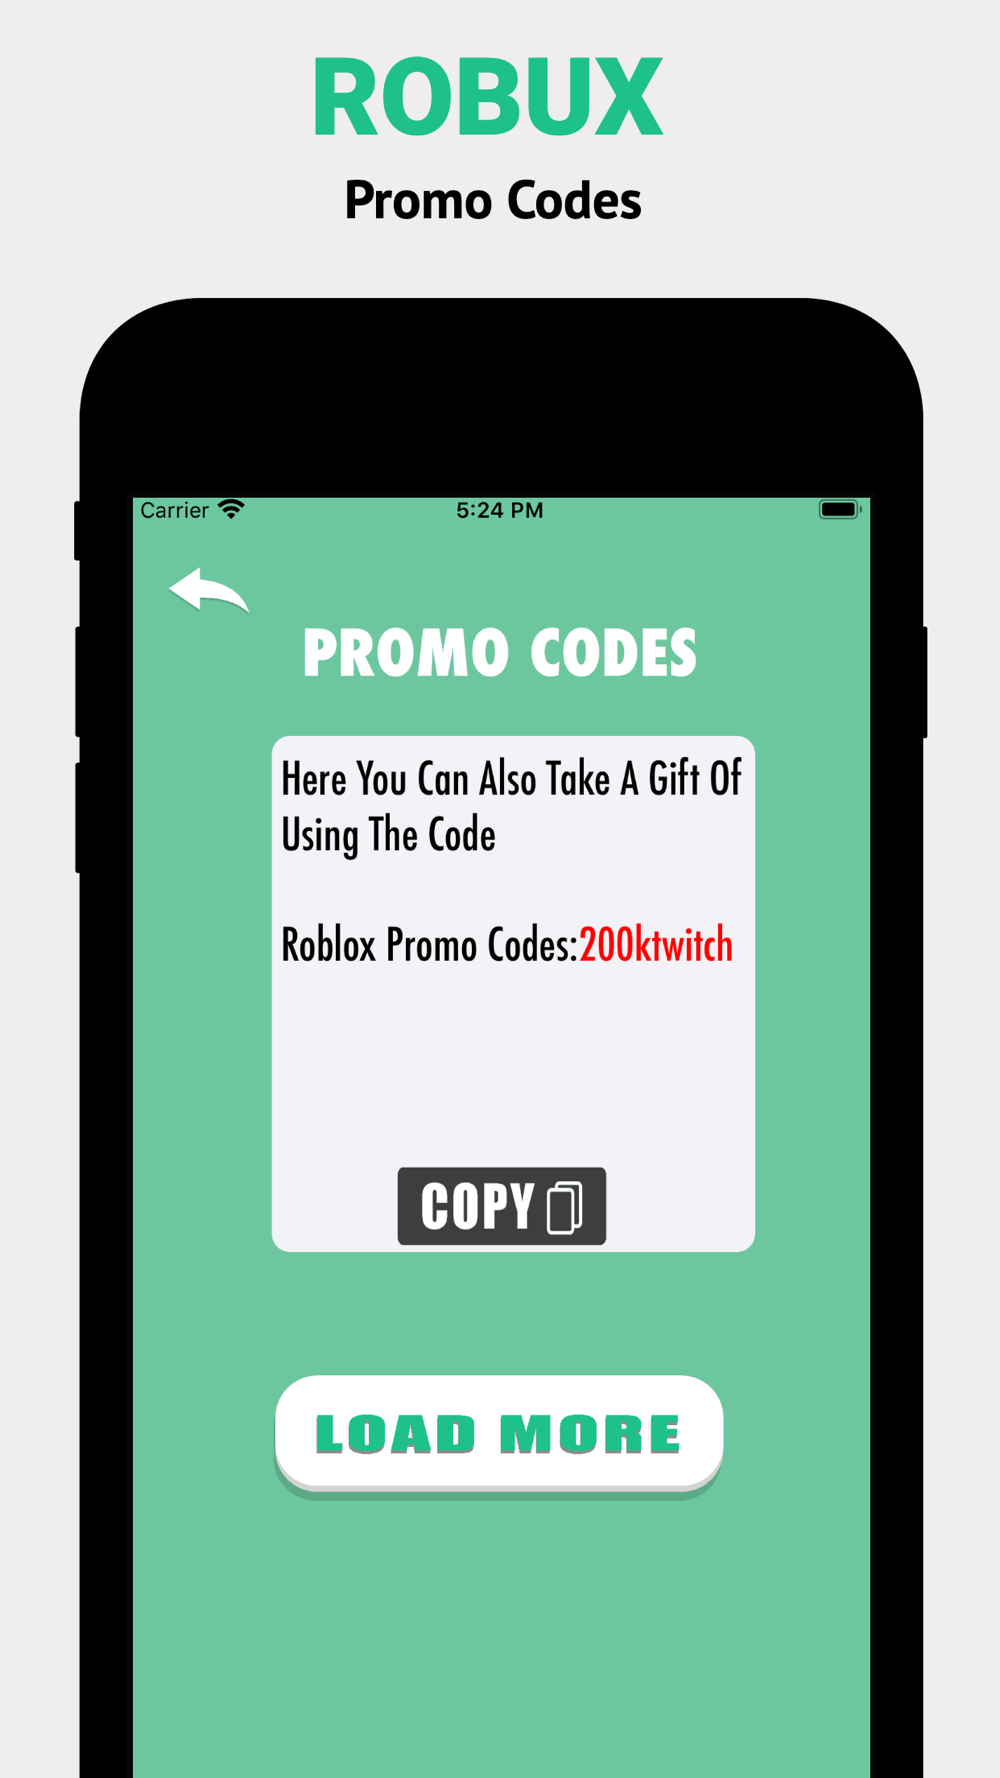 Robux Promo Codes For Roblox Free Download App For Iphone Steprimo Com - promo code green roblox